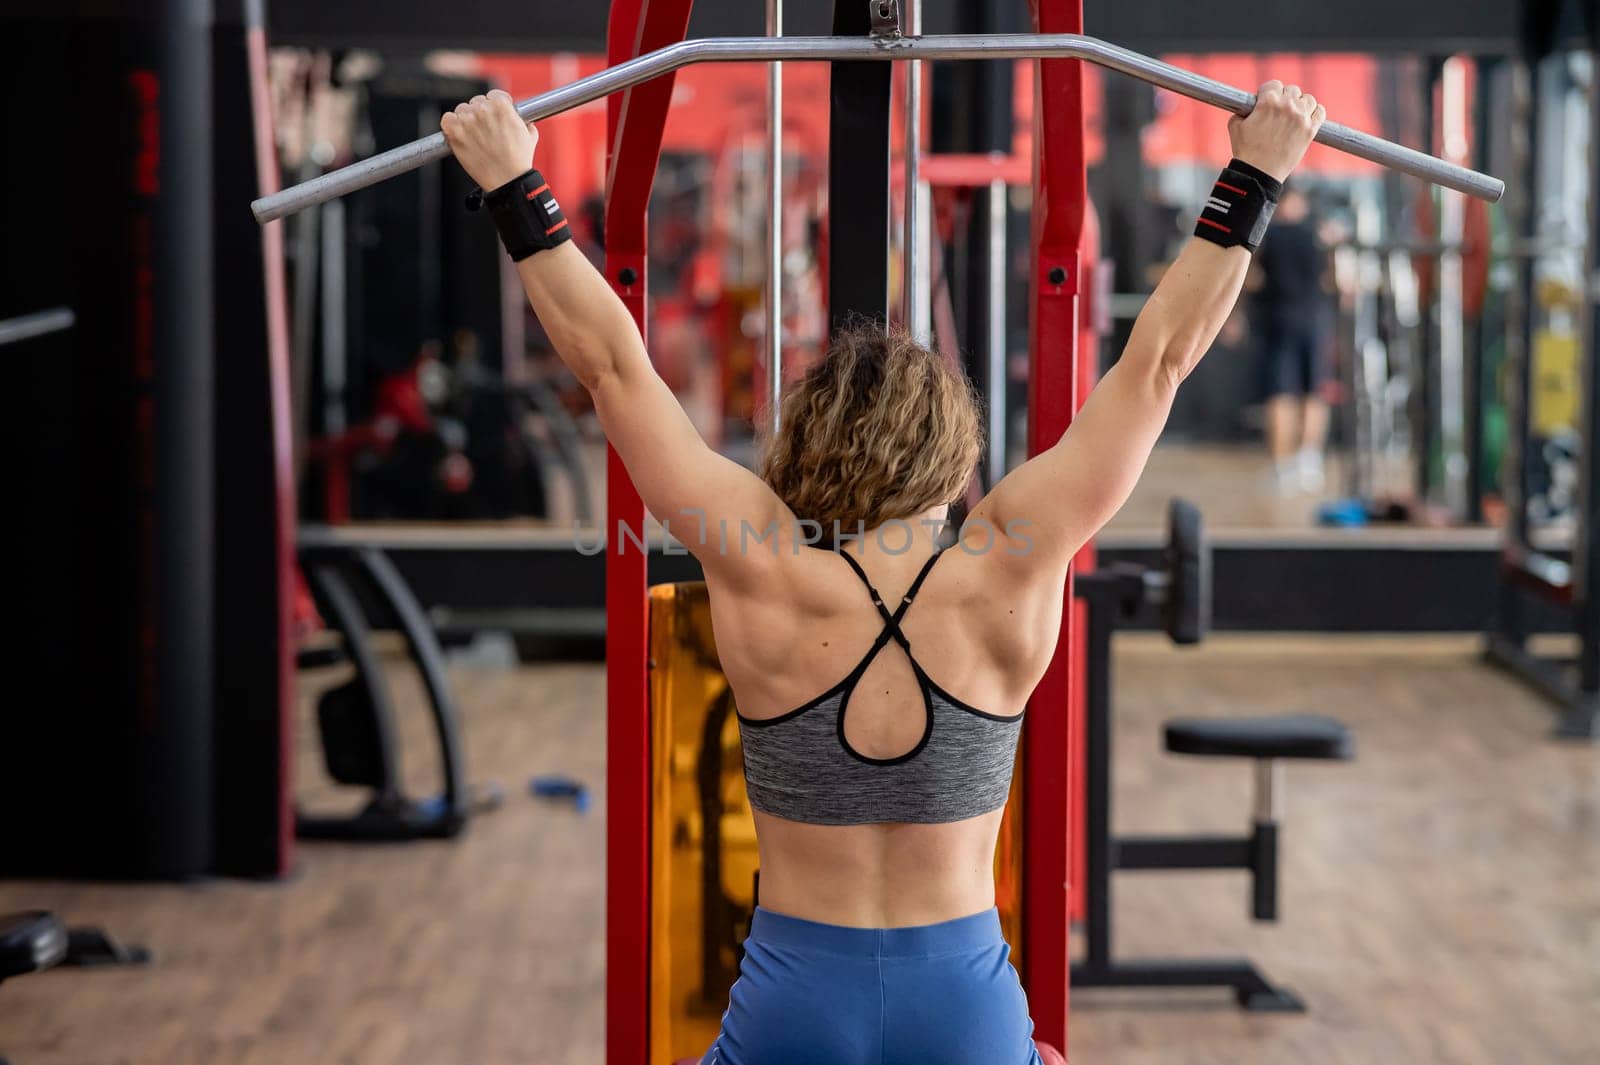 Rear view of a Caucasian forty-year-old woman doing lat pull-downs in the gym